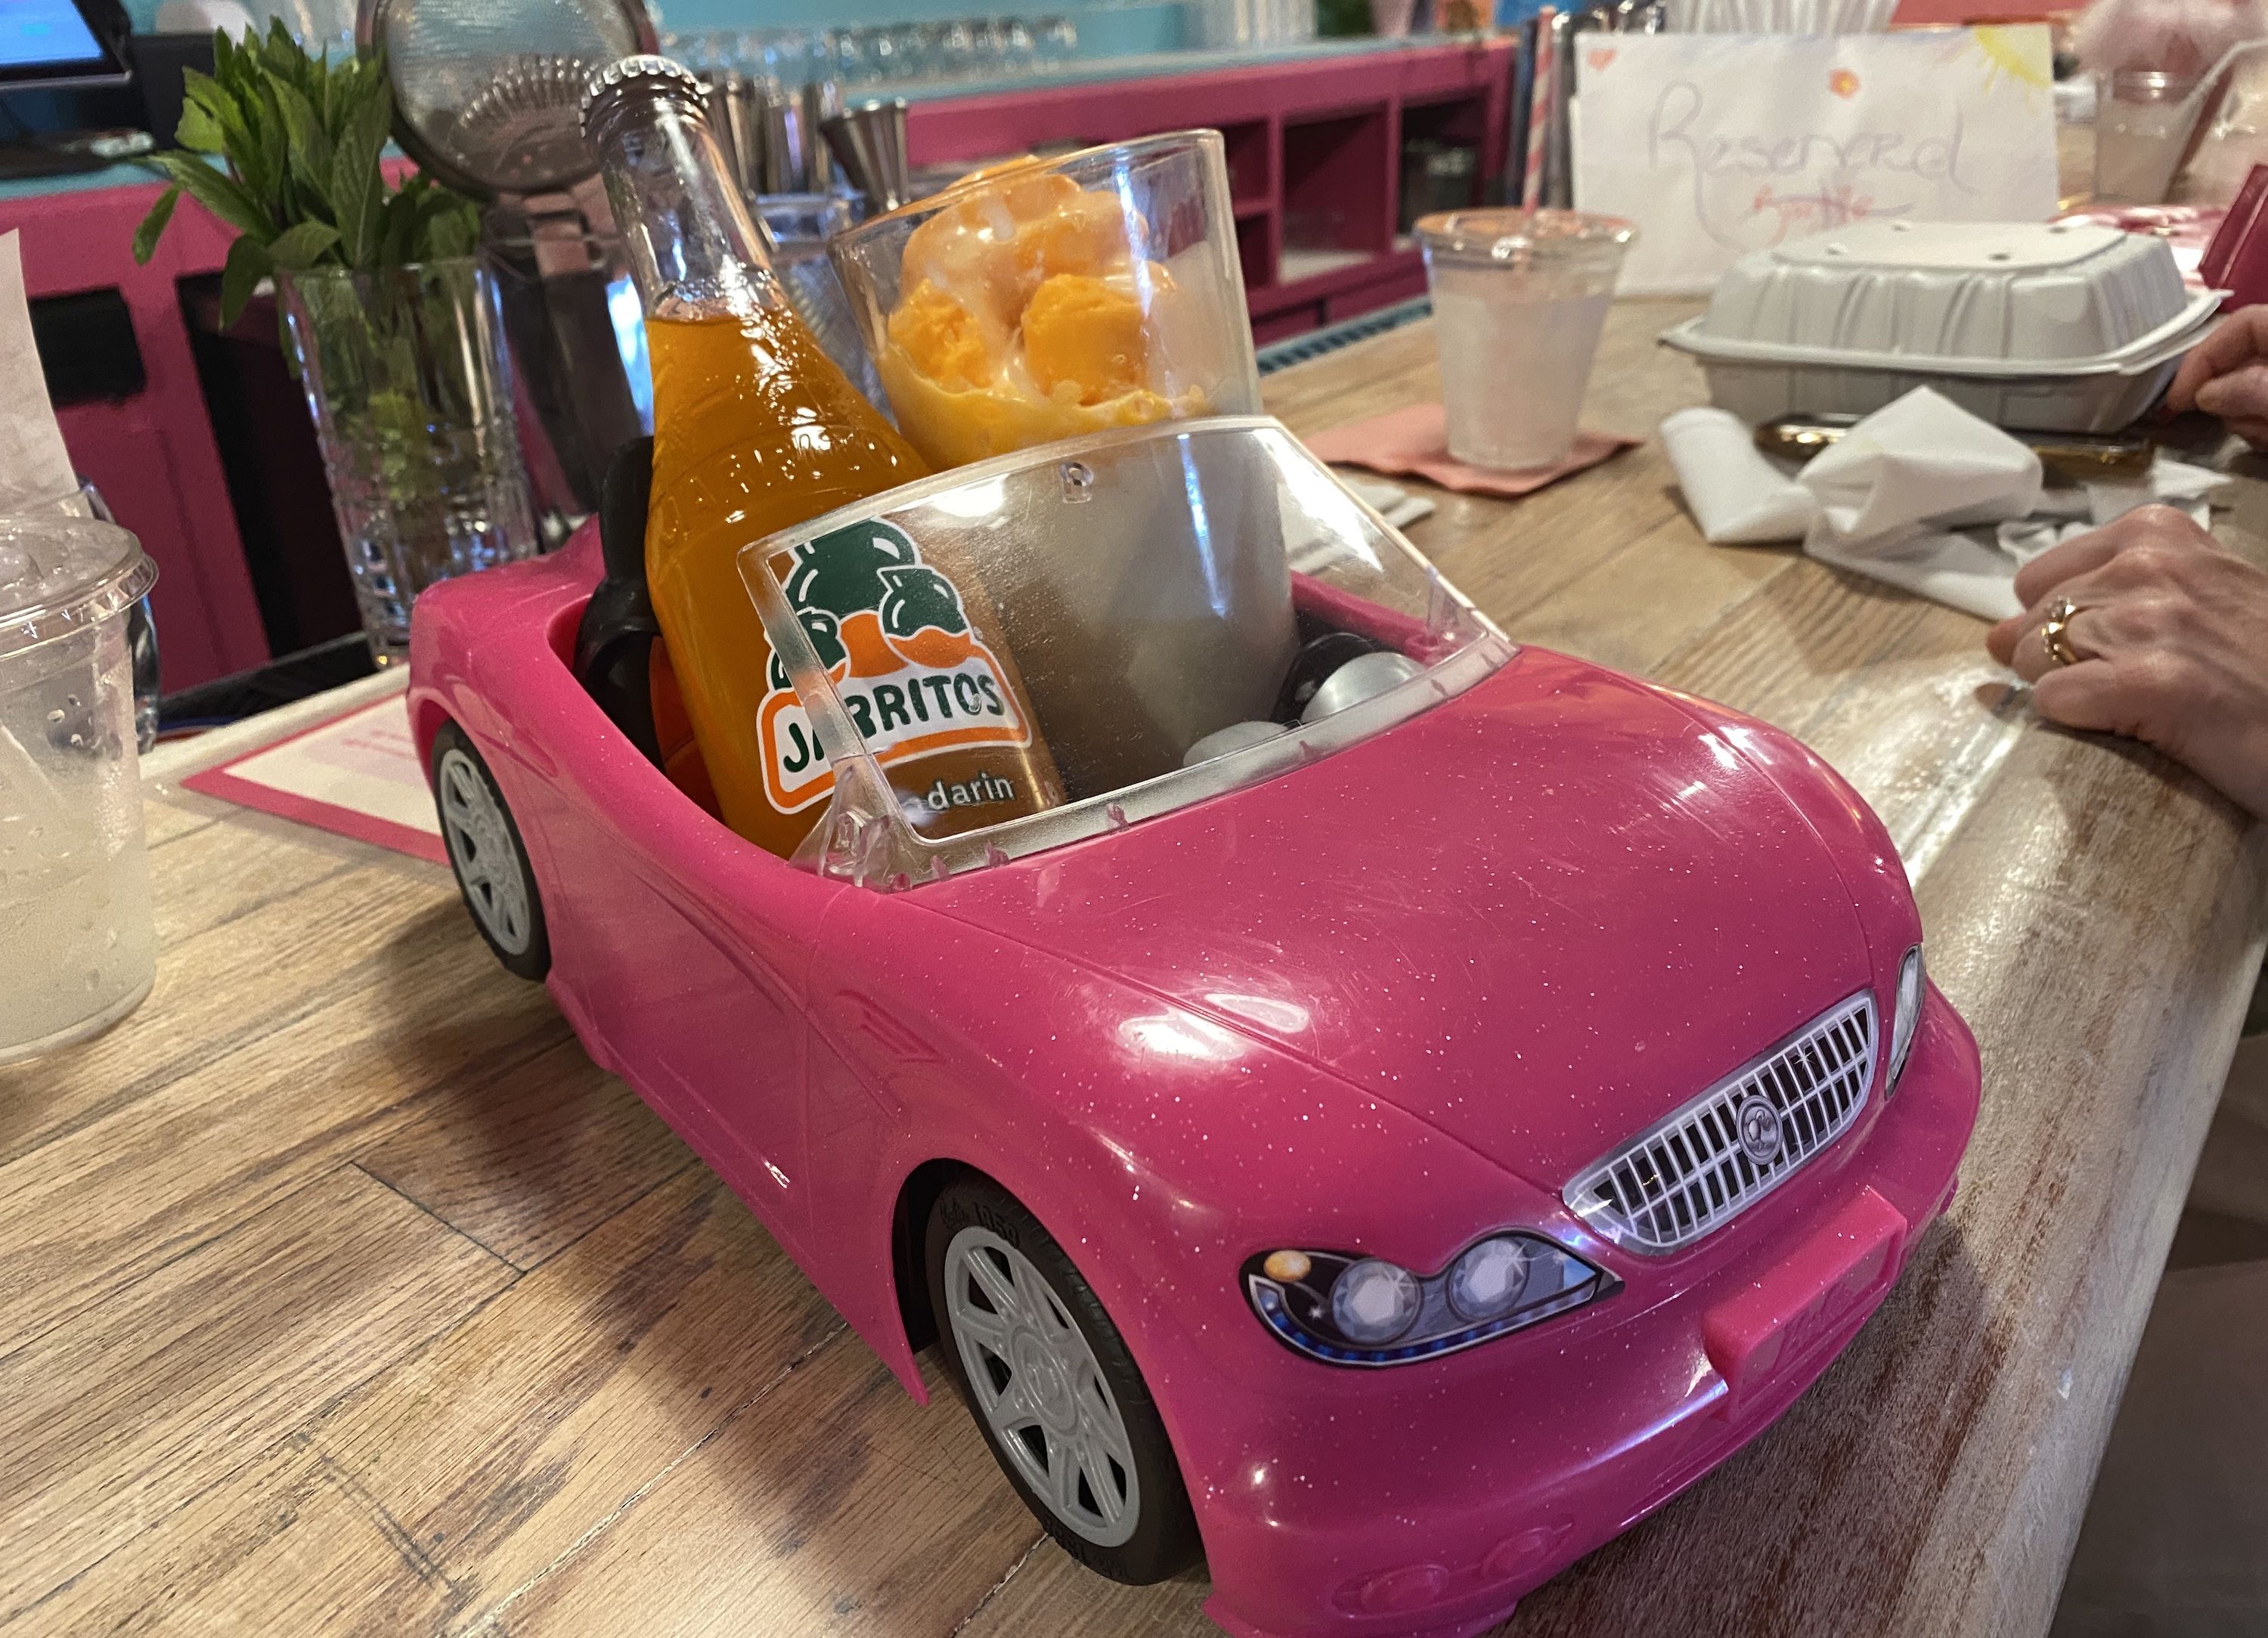 Pink toy car with a Jarritos orange soda bottle and glass of orange ice cream inside.